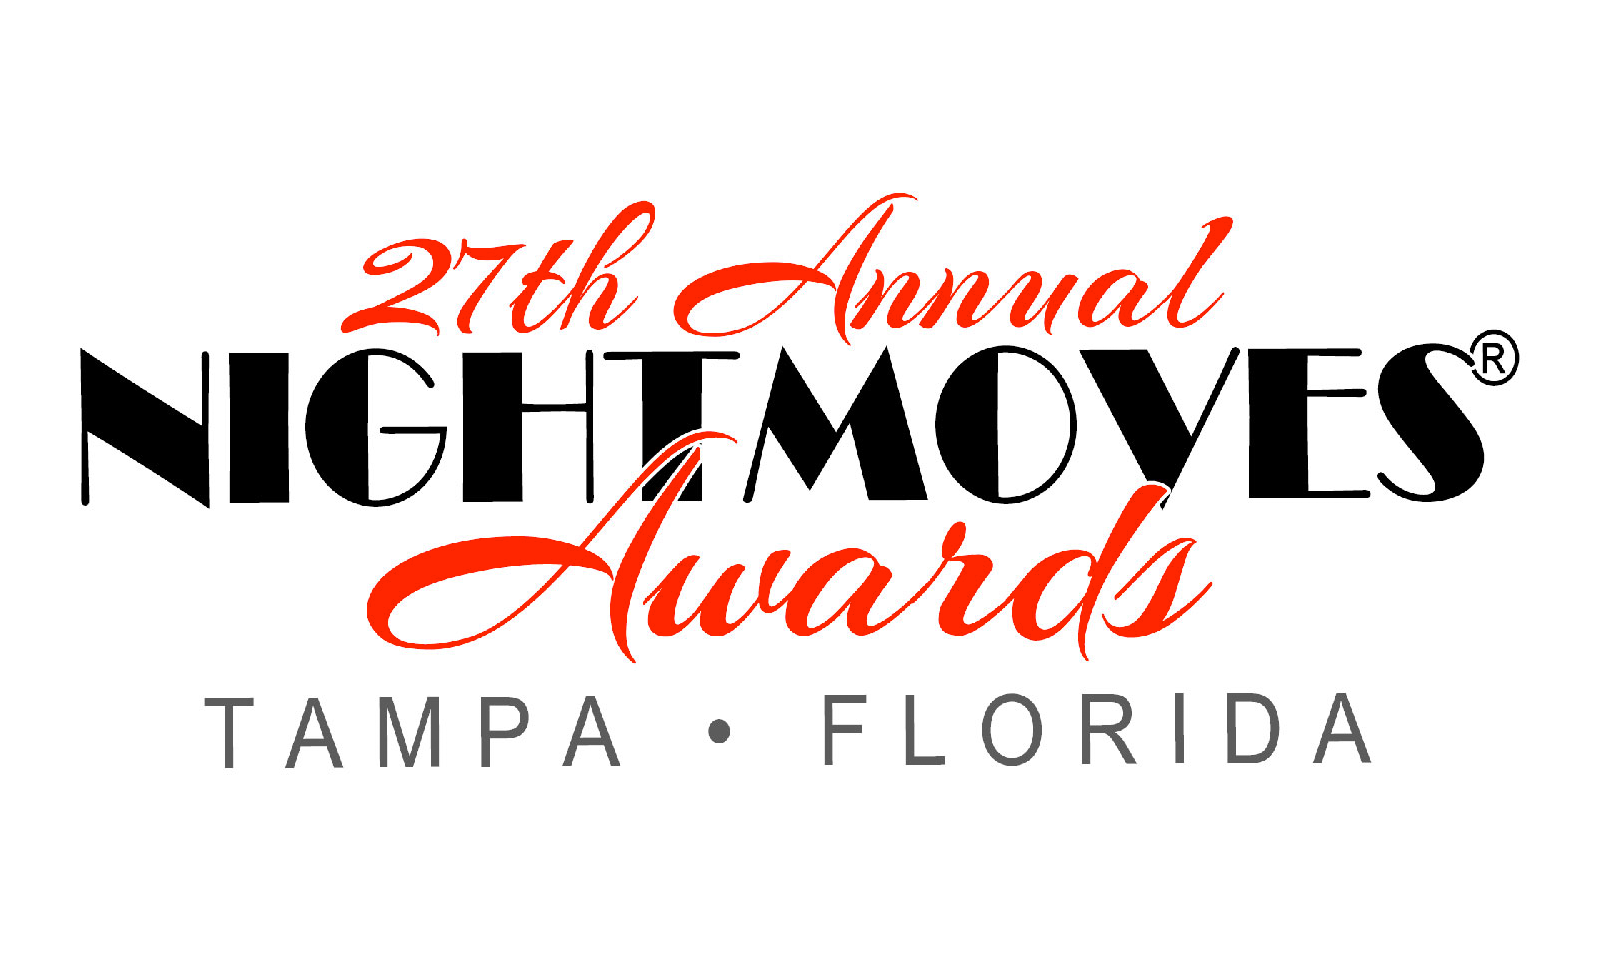 27th Annual NightMoves Awards Weekend Takes Place Oct 10-13